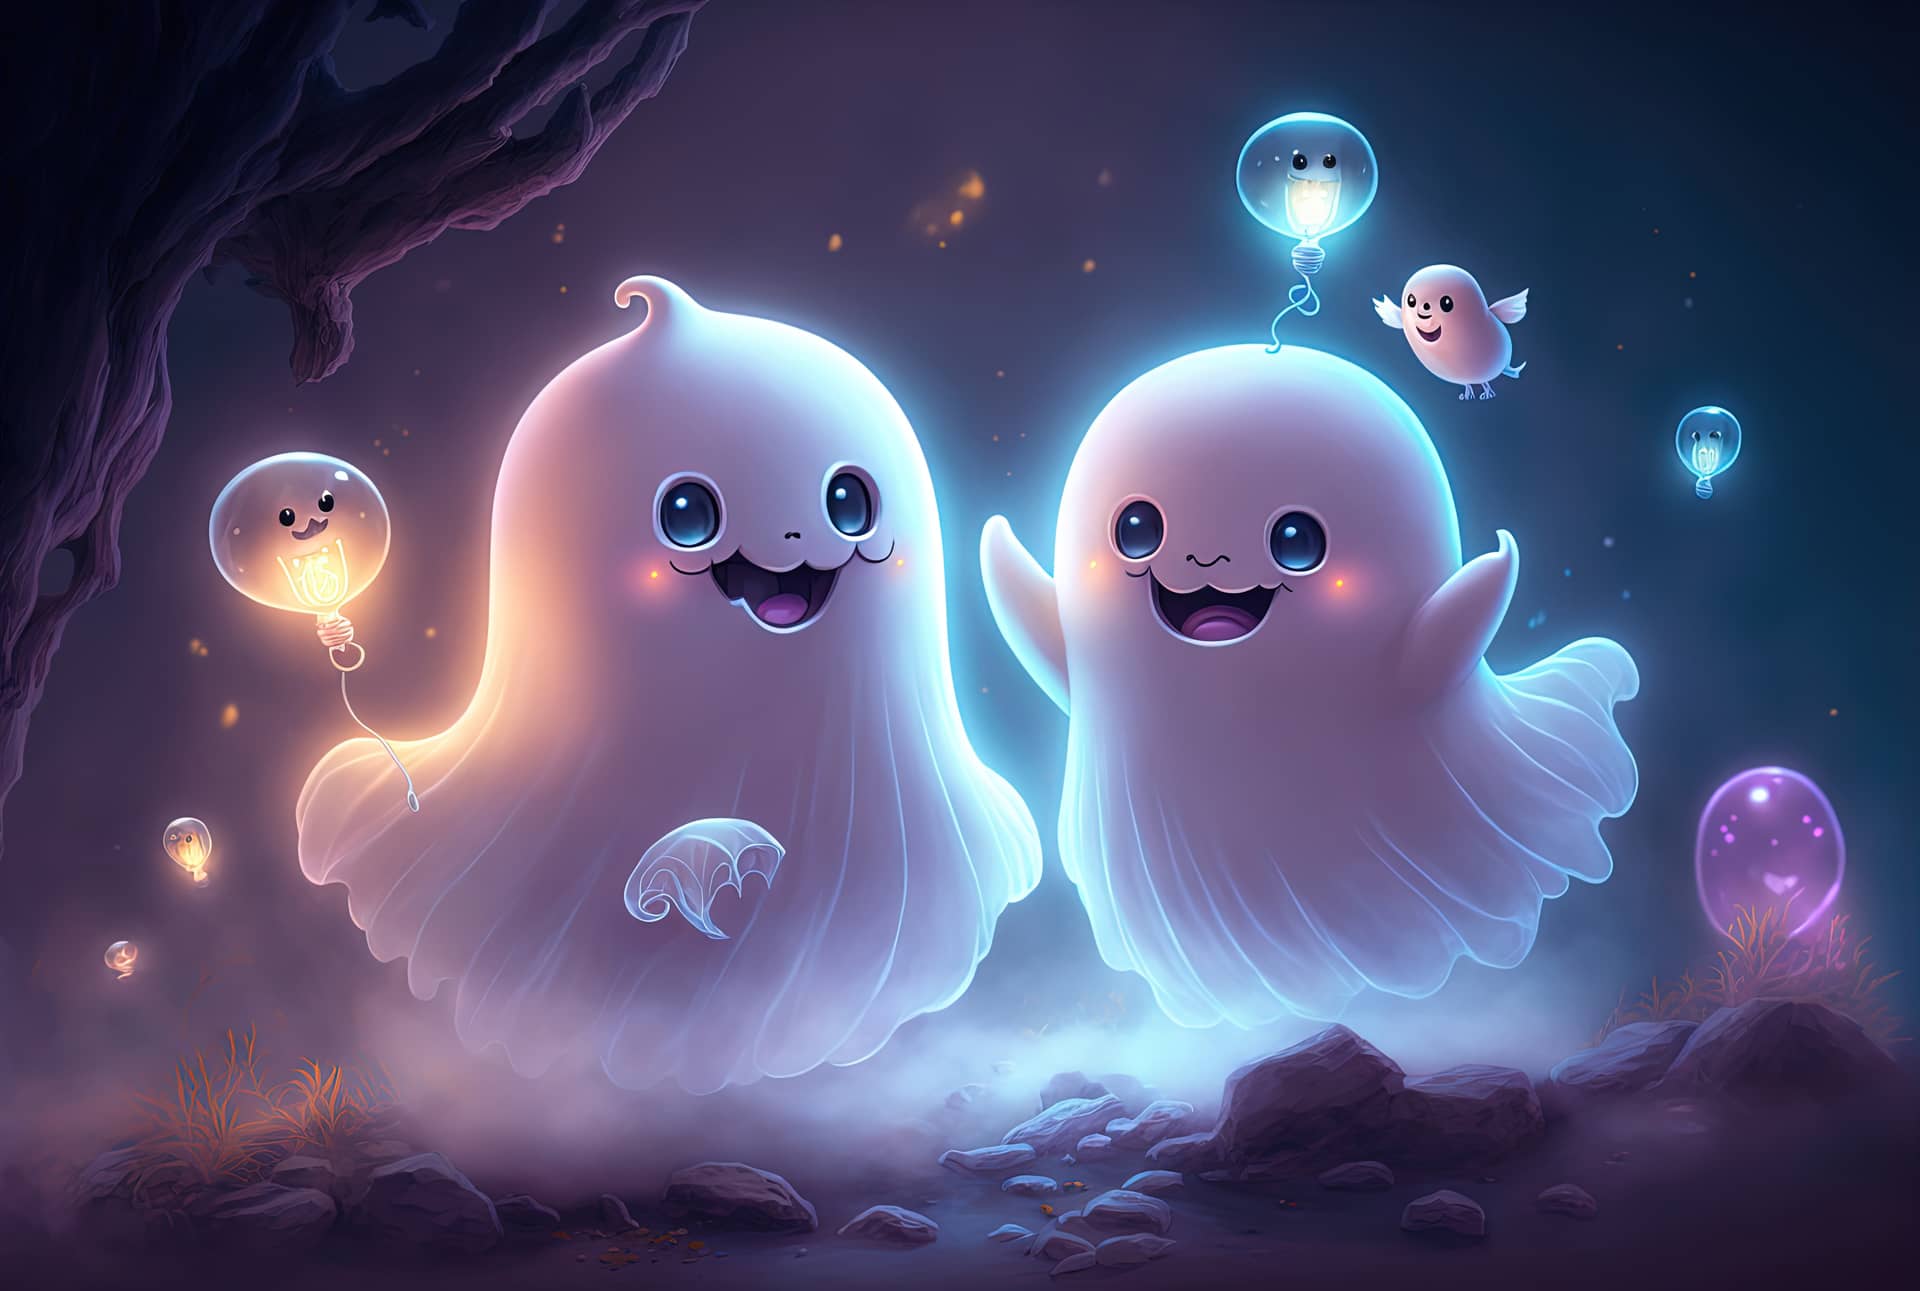 Cute so scary ghost playing having fun generative excellent image